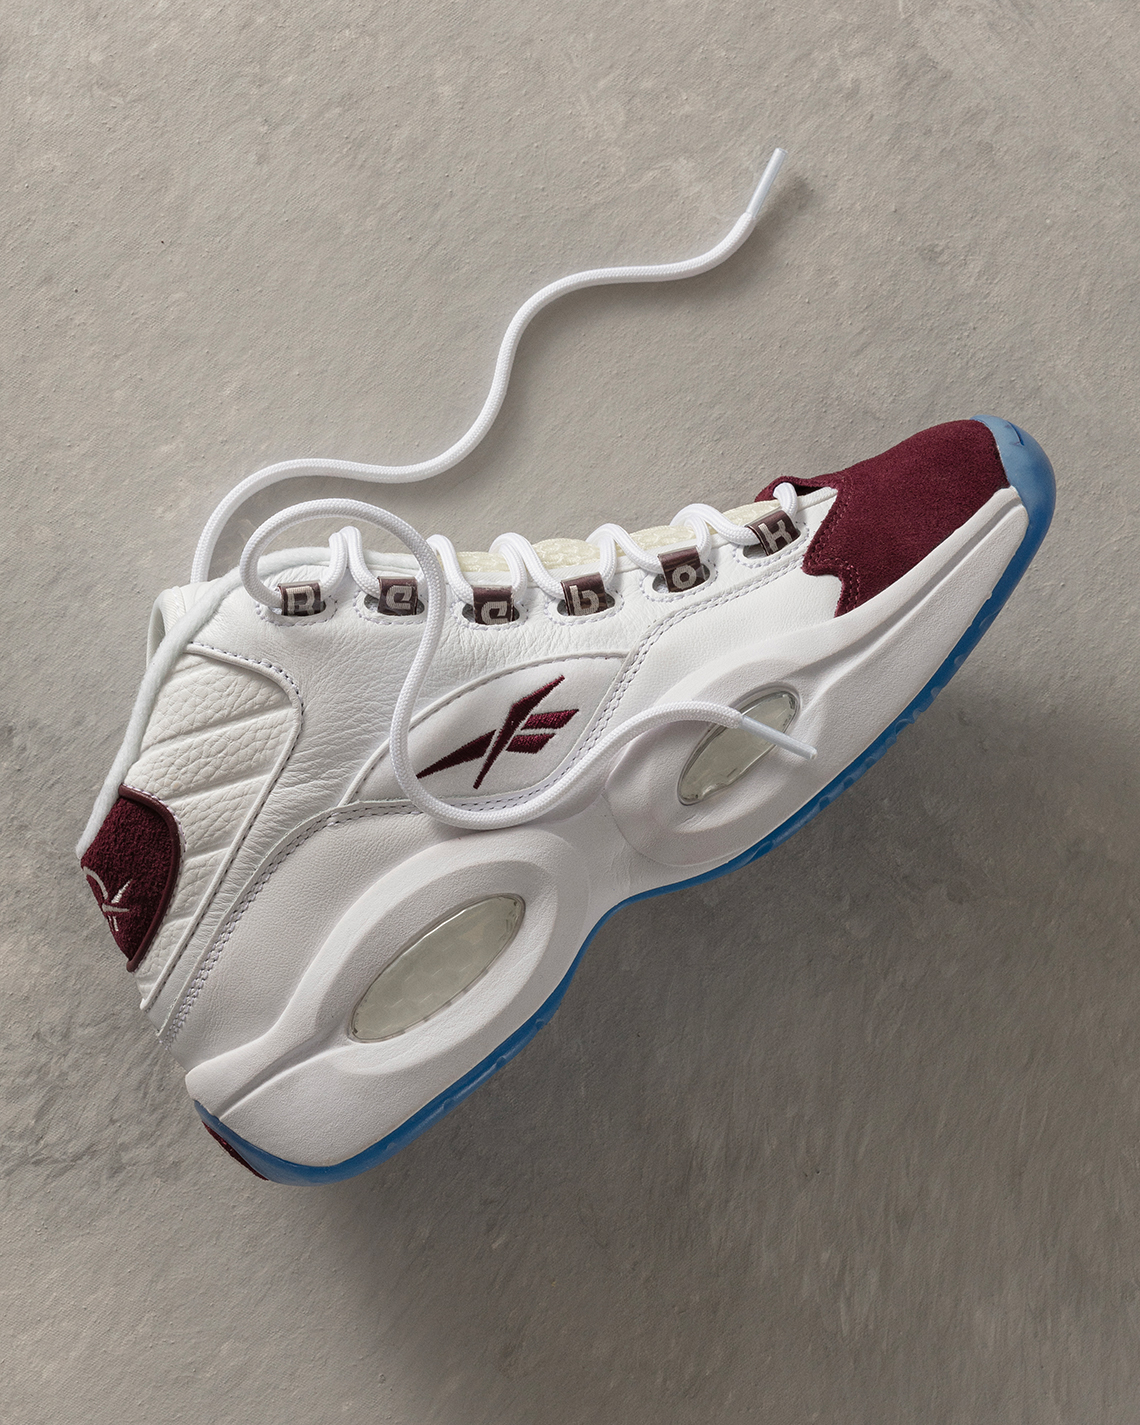 Packer brand new with original box Reebok Royal Glide Ripple Clip CM9099 Burgundy Suede Release Date 5